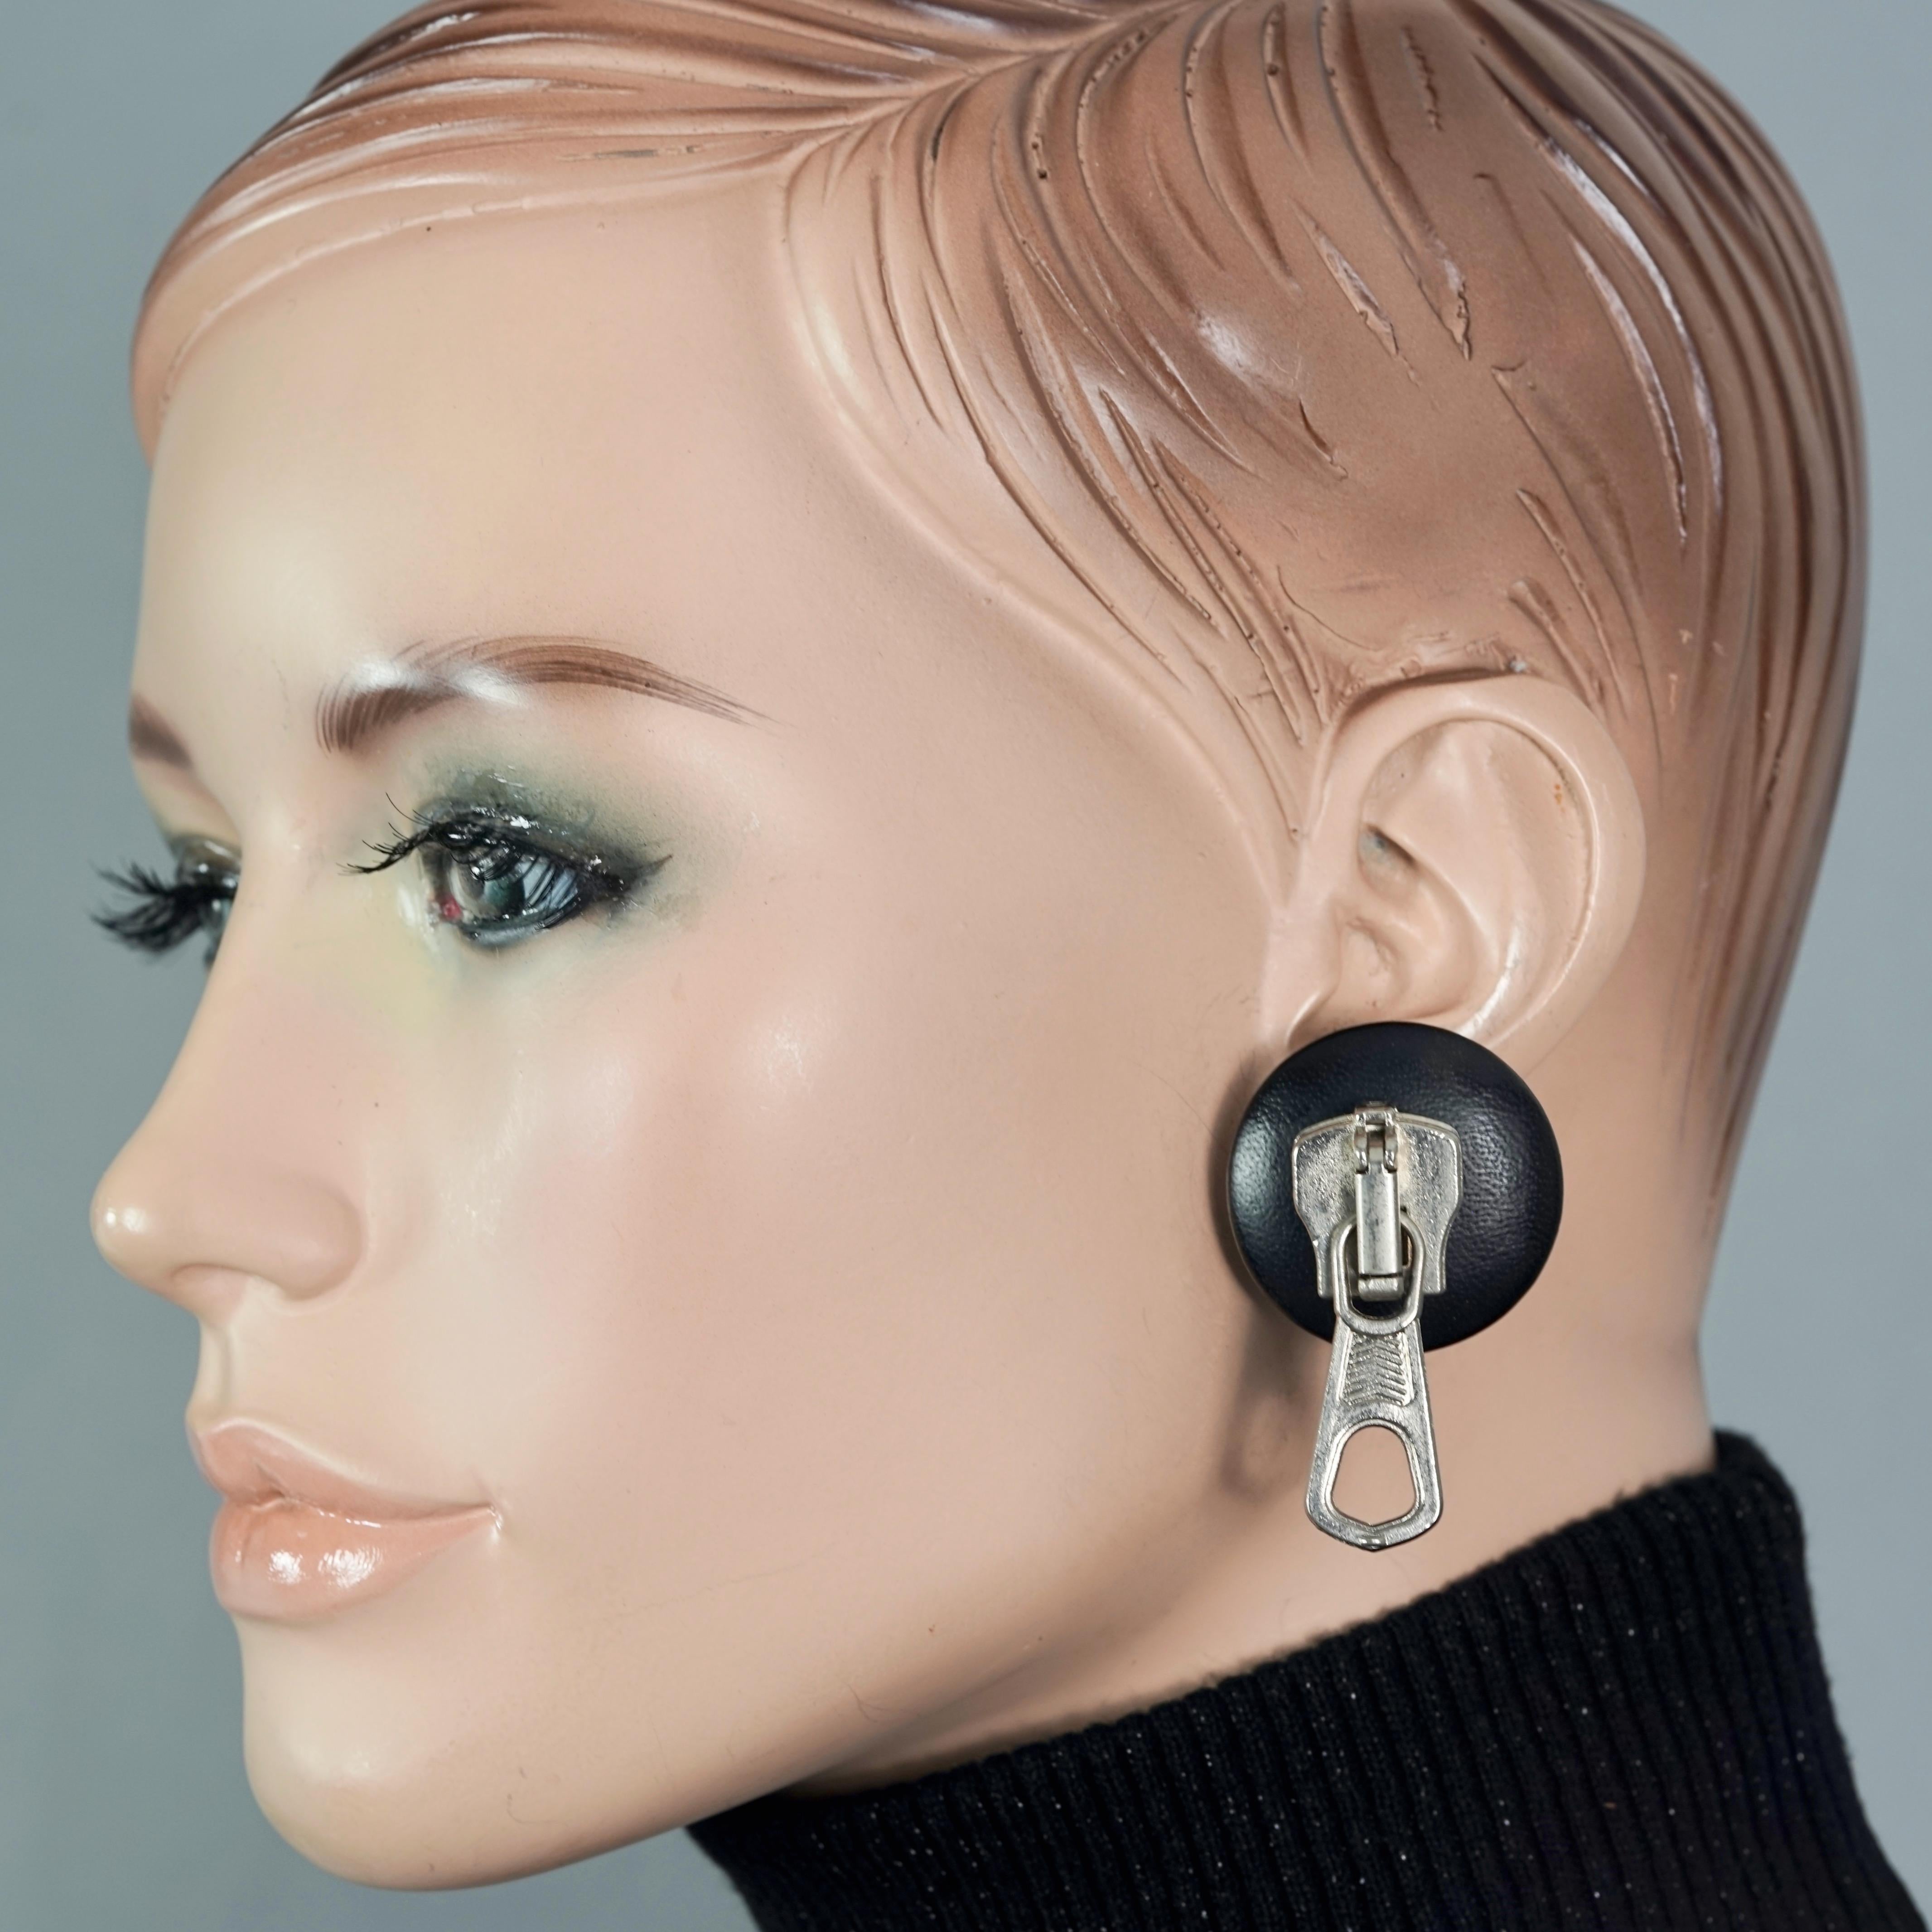 Vintage MOSCHINO Zipper Leather Disc Novelty Earrings

Measurements:
Height: 1.89 inches (4.8 cm)
Width: 1.26 inches (3.2 cm)
Weight per Earring: 16 grams

Features:
- 100% Authentic MOSCHINO.
- Zipper on black leather disc earrings.
- Silver tone